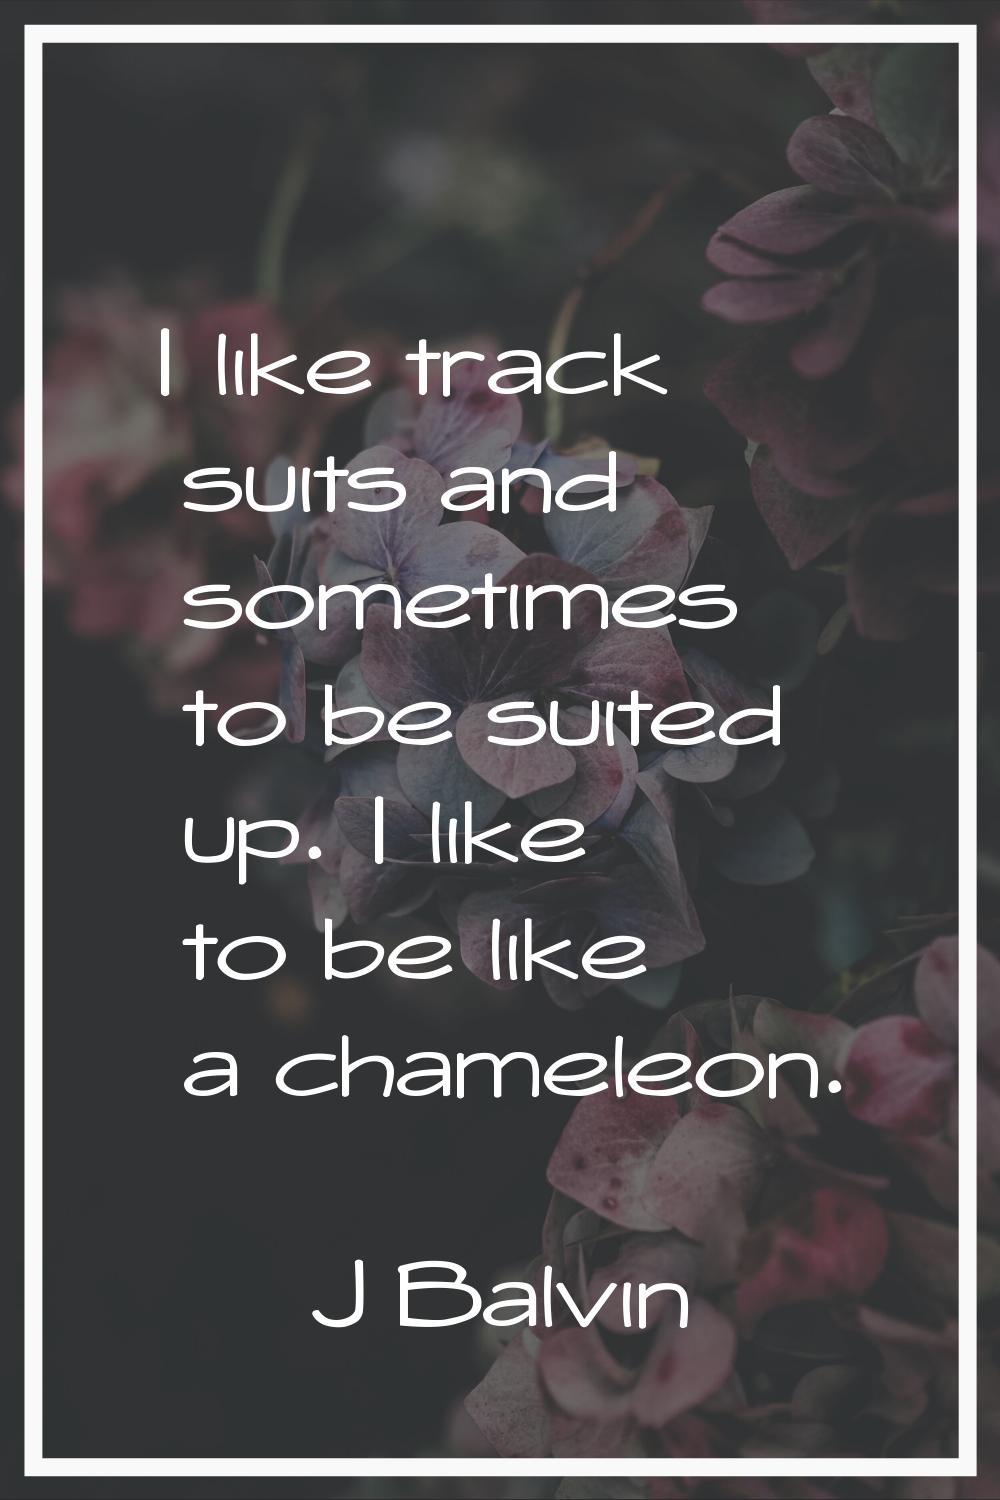 I like track suits and sometimes to be suited up. I like to be like a chameleon.